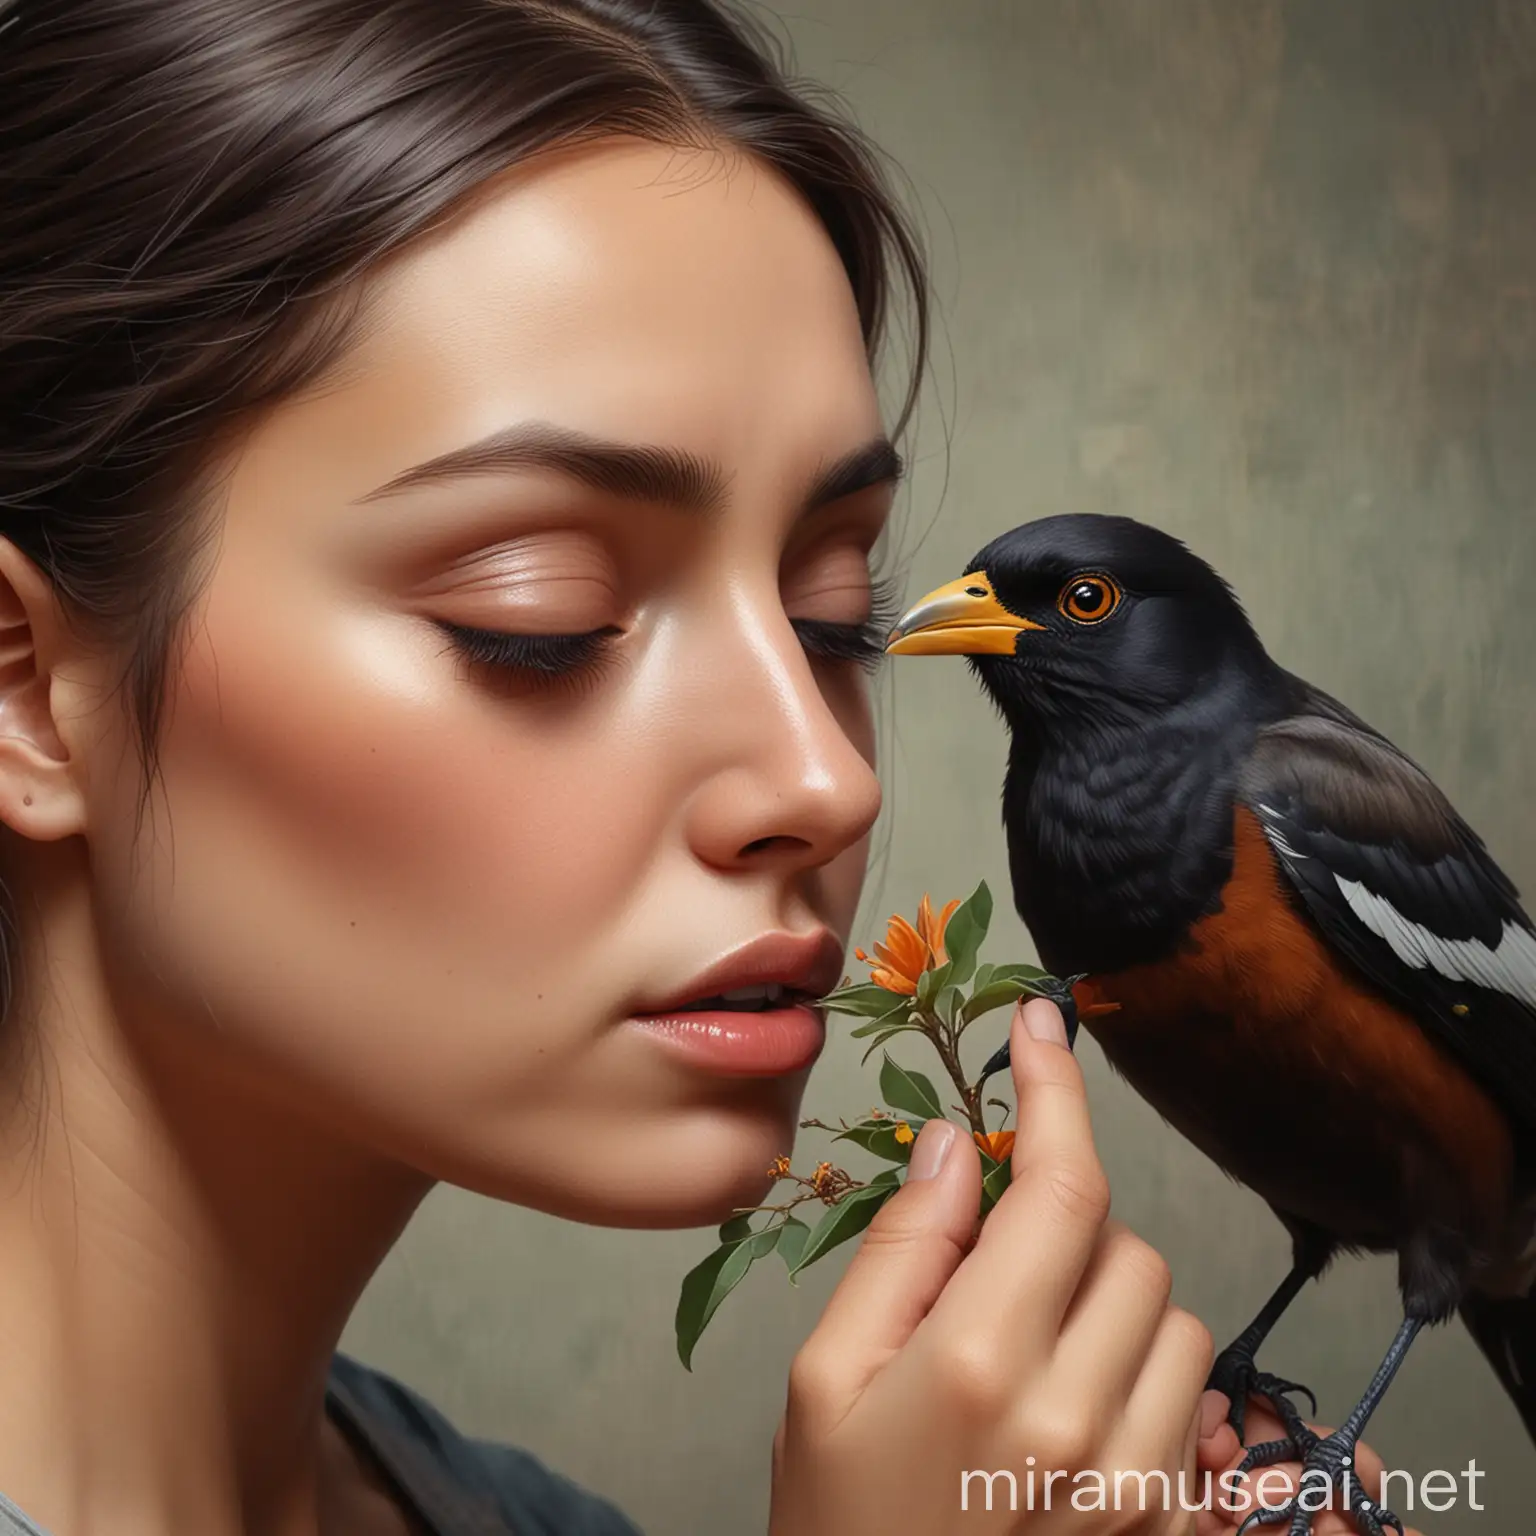 Hyperrealistic Digital Painting of Woman Holding Eye Open with Myna Bird